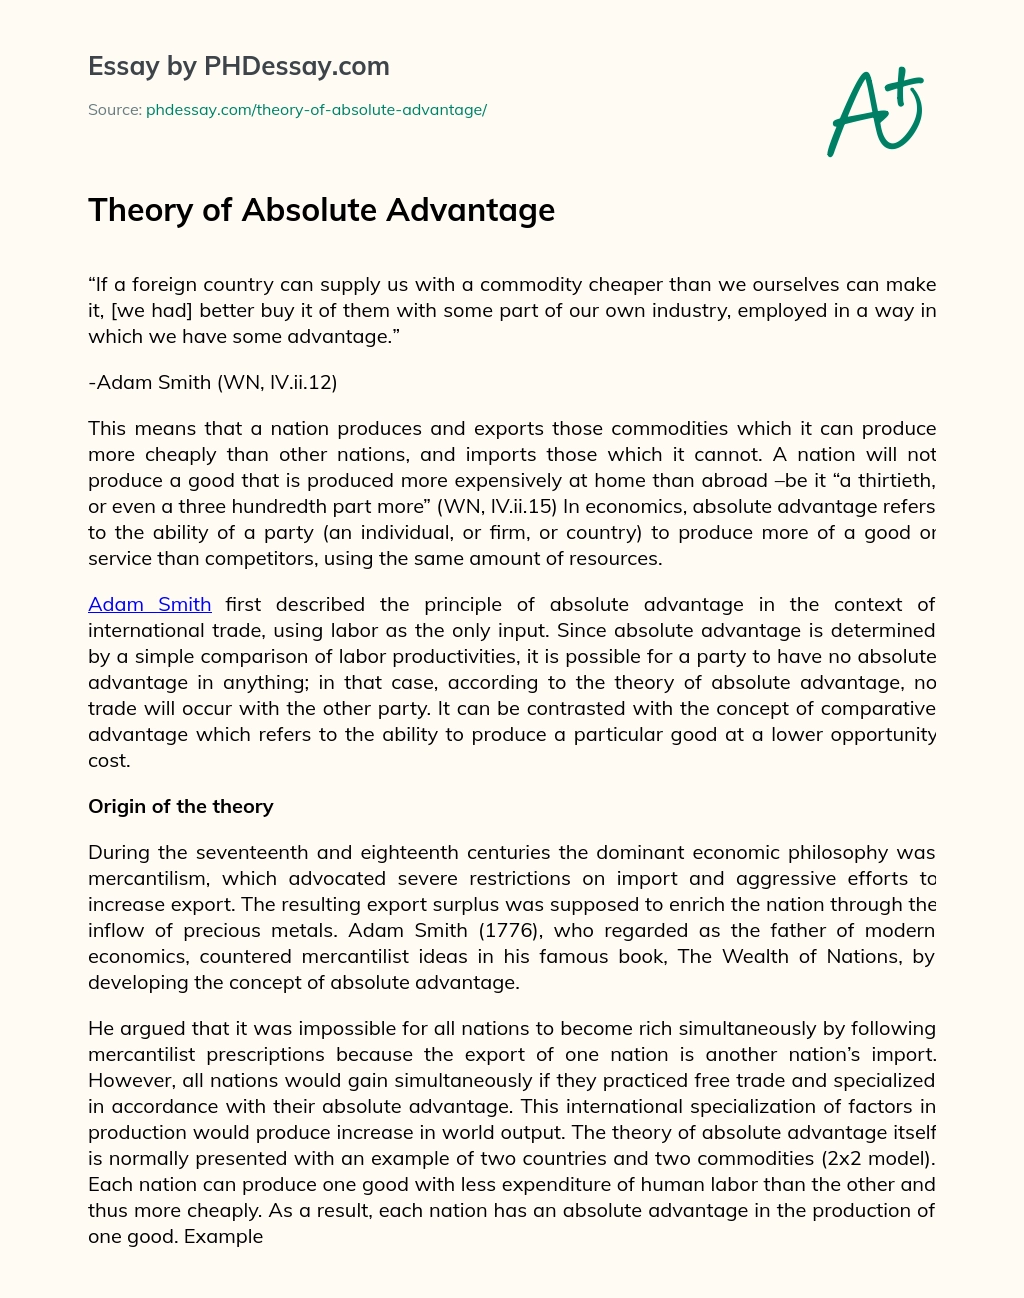 Theory of Absolute Advantage essay